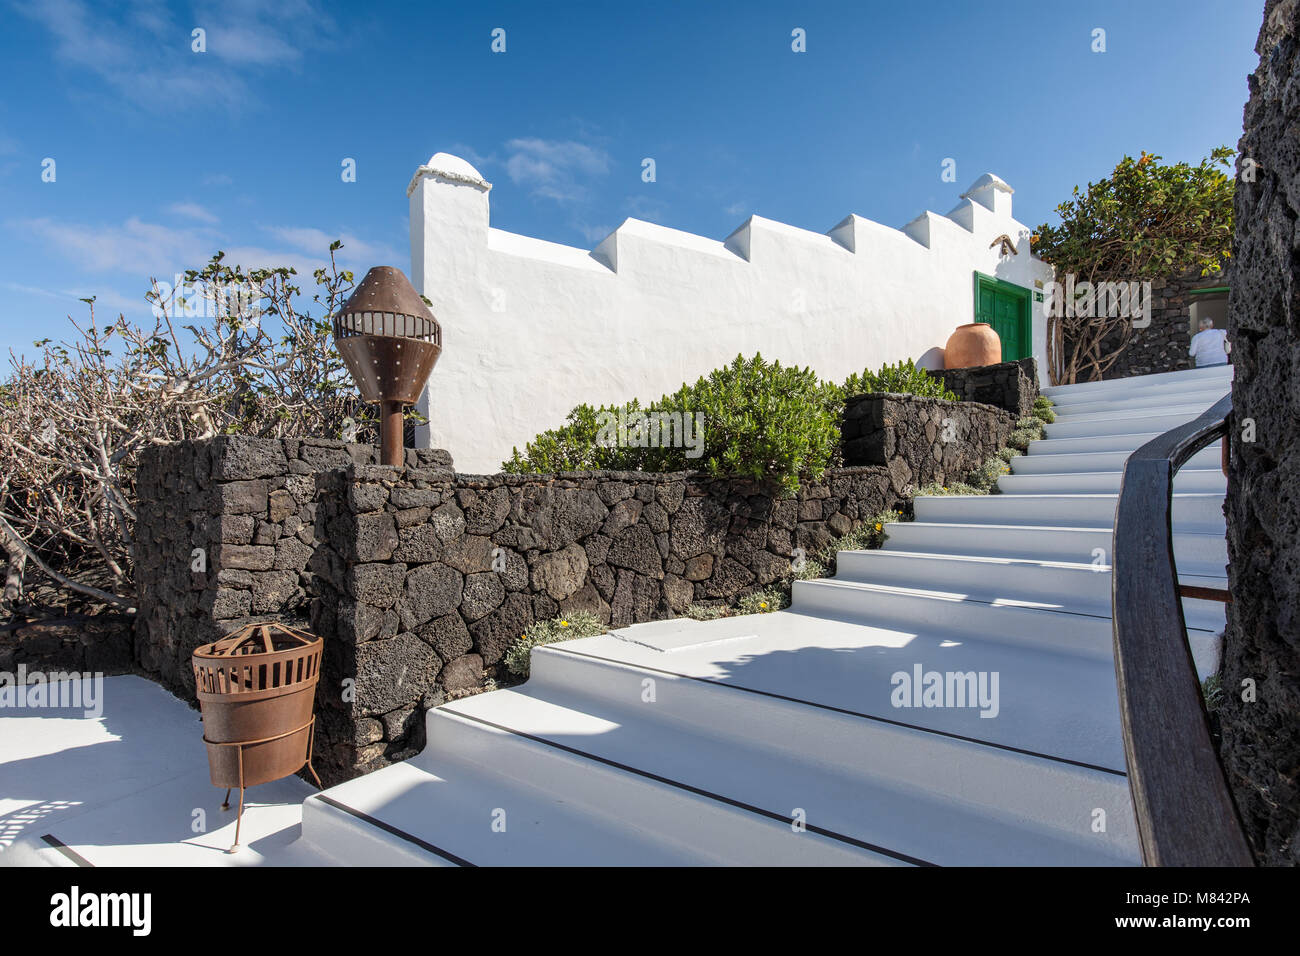 The César Manrique Foundation near Tahiche, Lanzarote is the former home of Cesar Manrique. Today it is a museum. Stock Photo